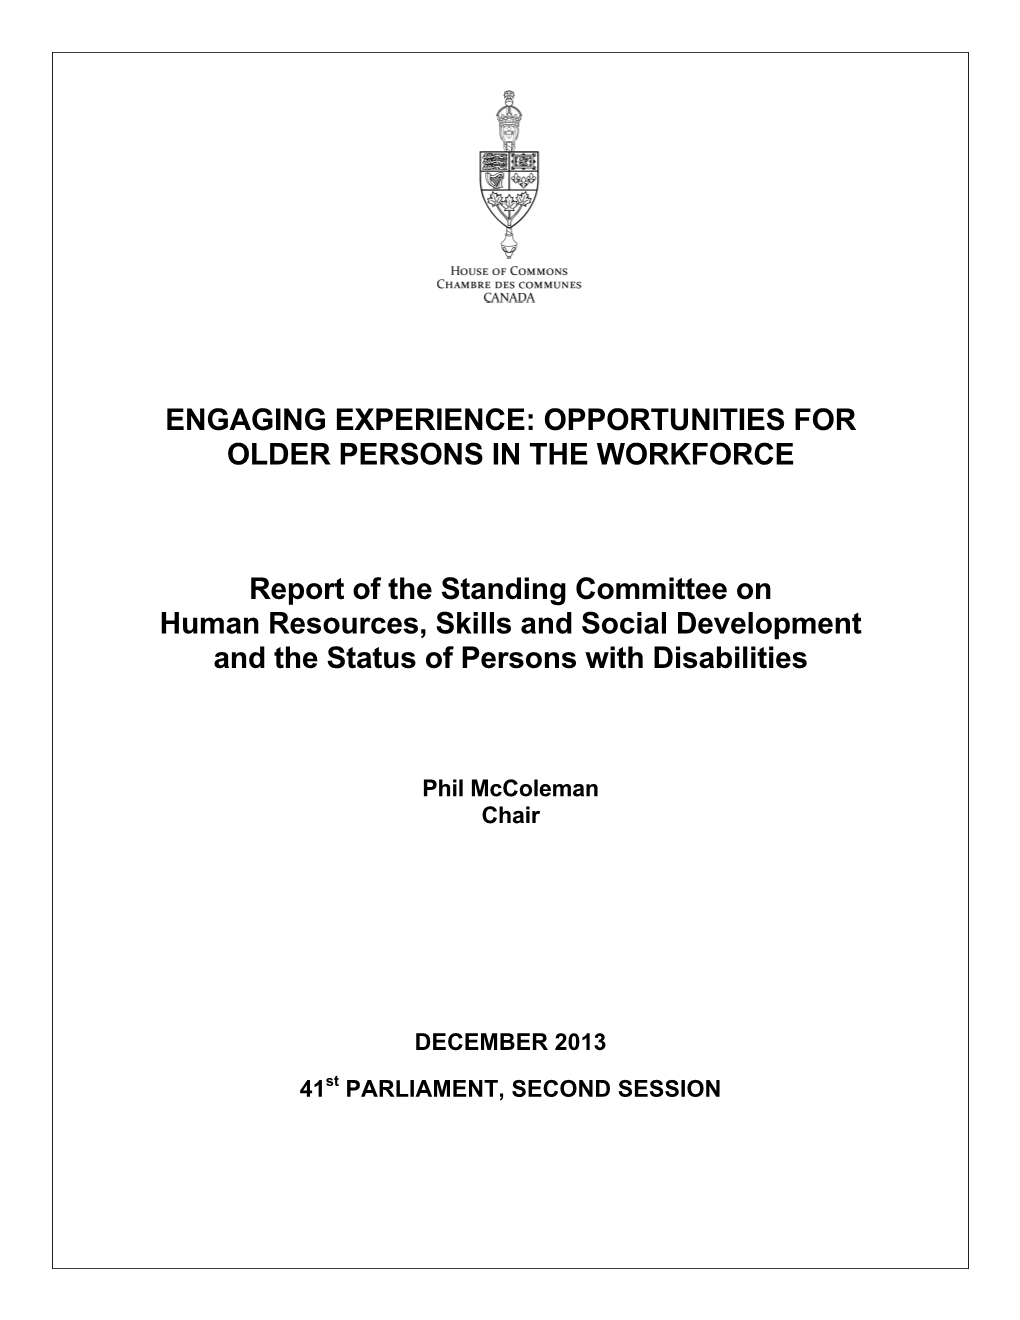 Opportunities for Older Persons in the Workforce